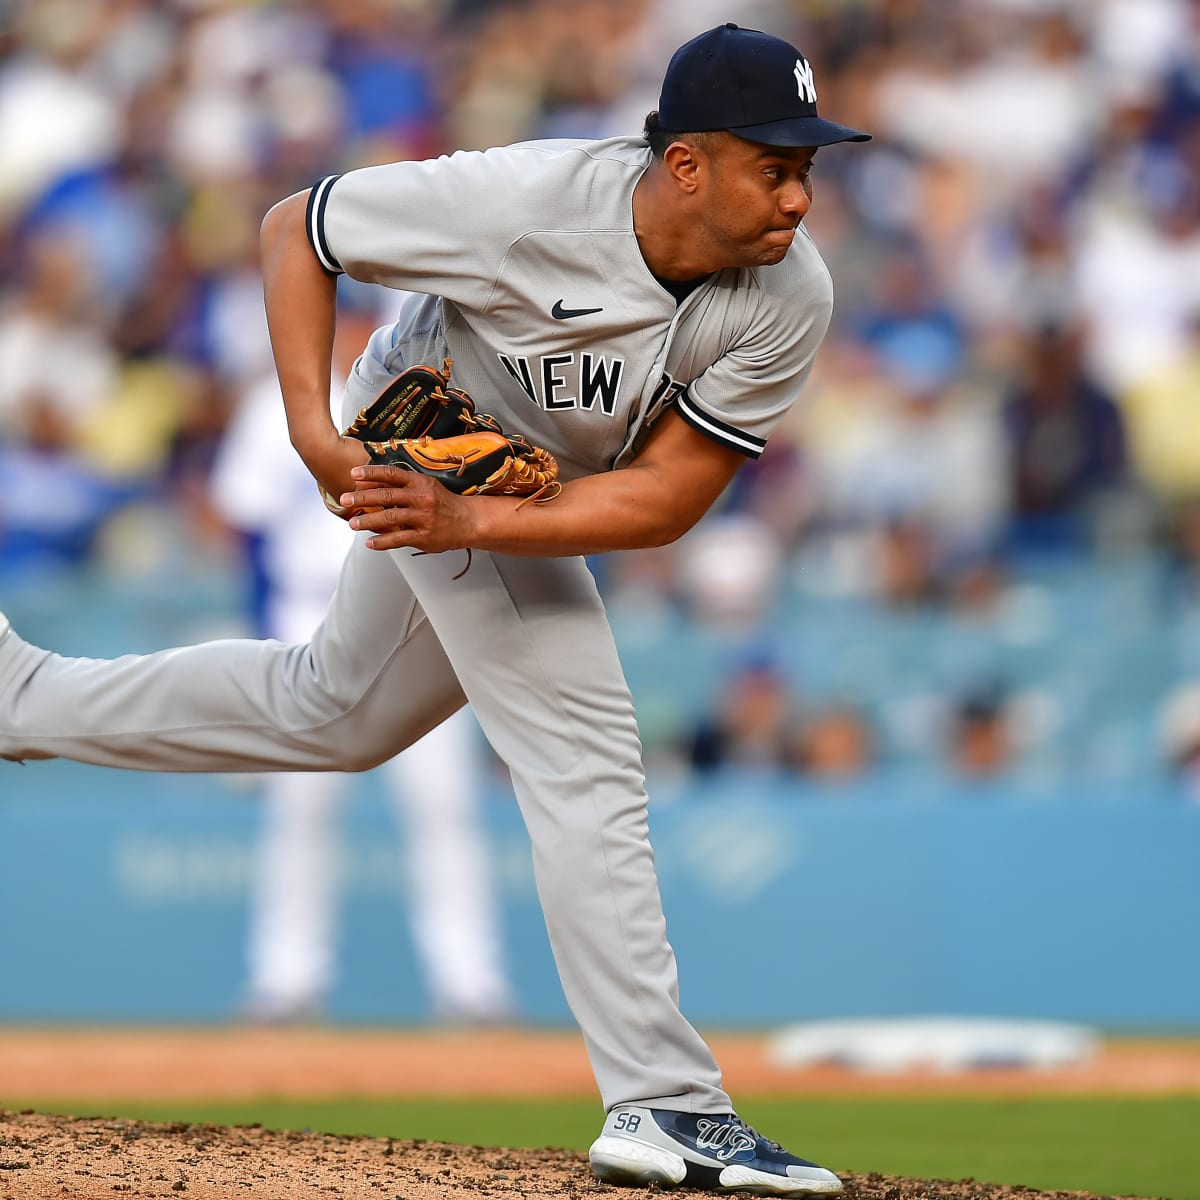 Relievers from the Yankees, Mets on what makes a good bullpen